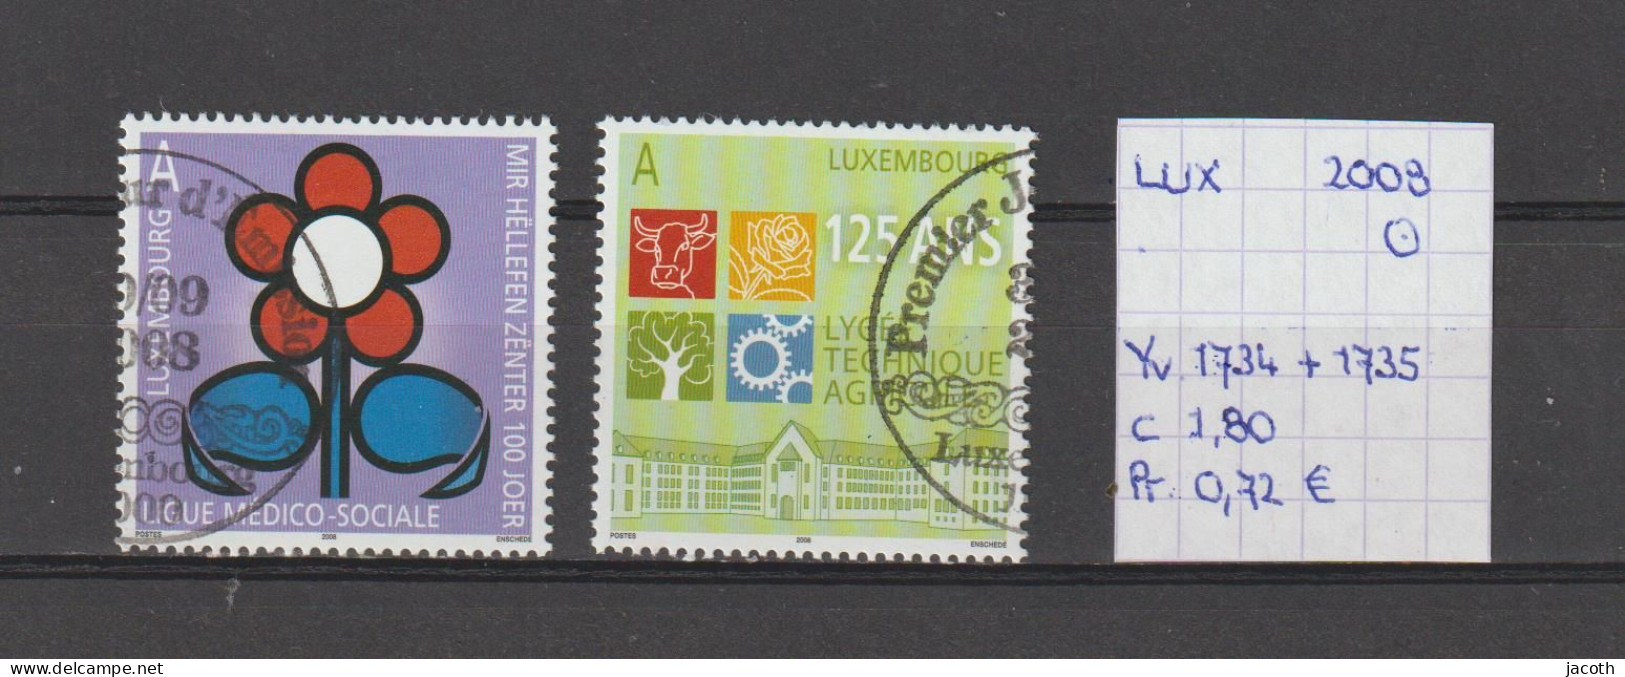 (TJ) Luxembourg 2008 - YT 1734 + 1735 (gest./obl./used) - Usati